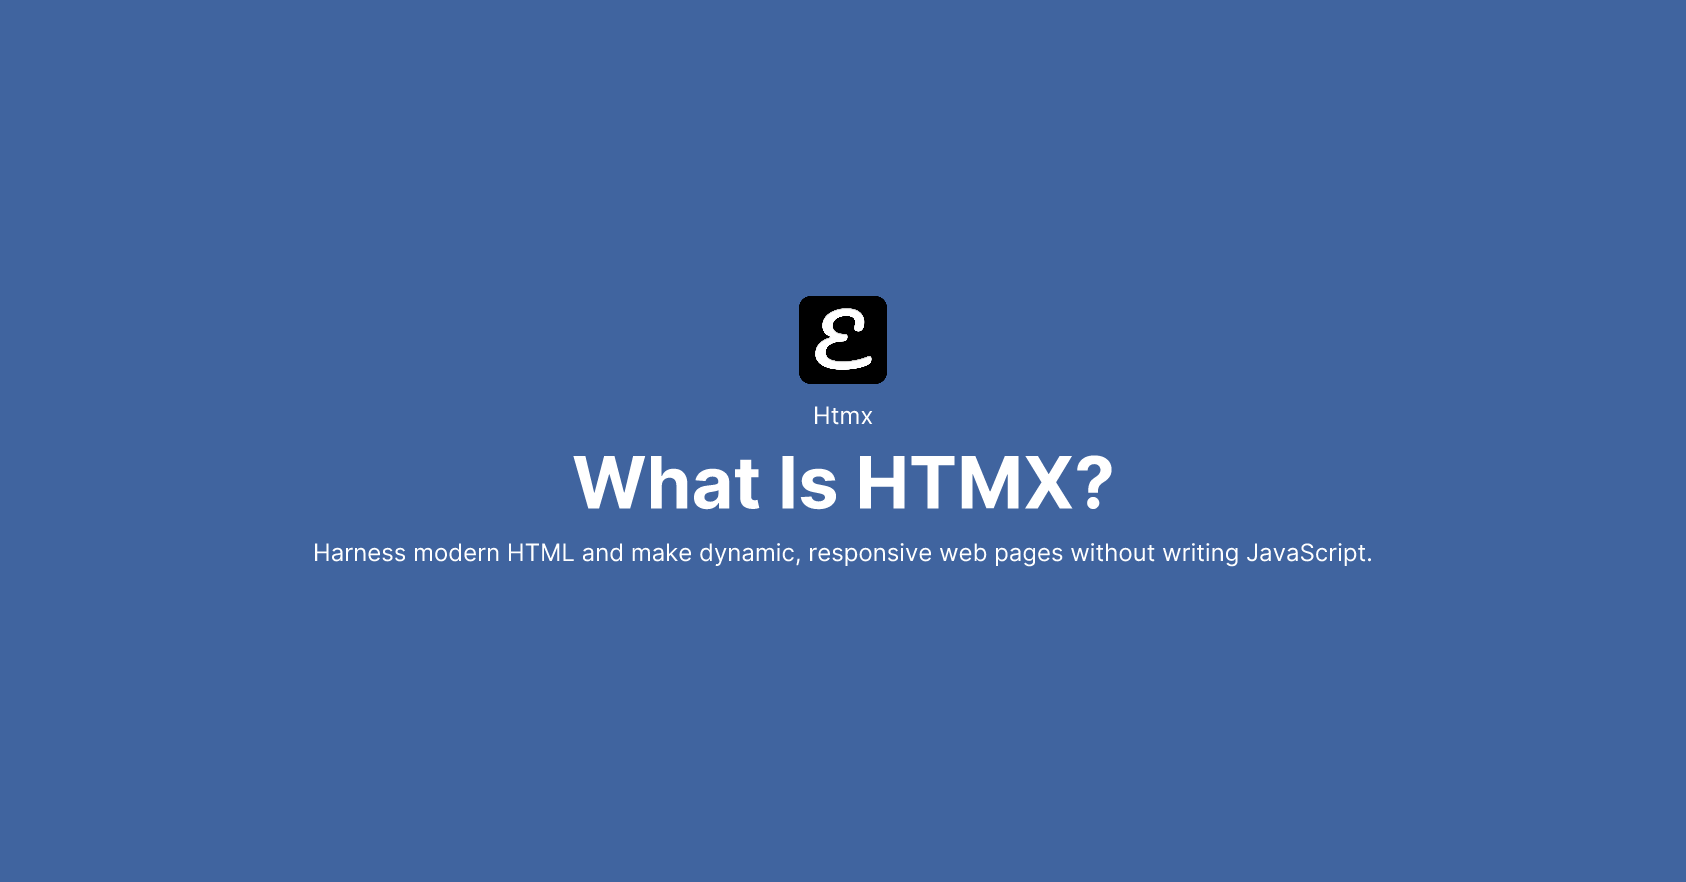 What Is HTMX? by Eric David Smith